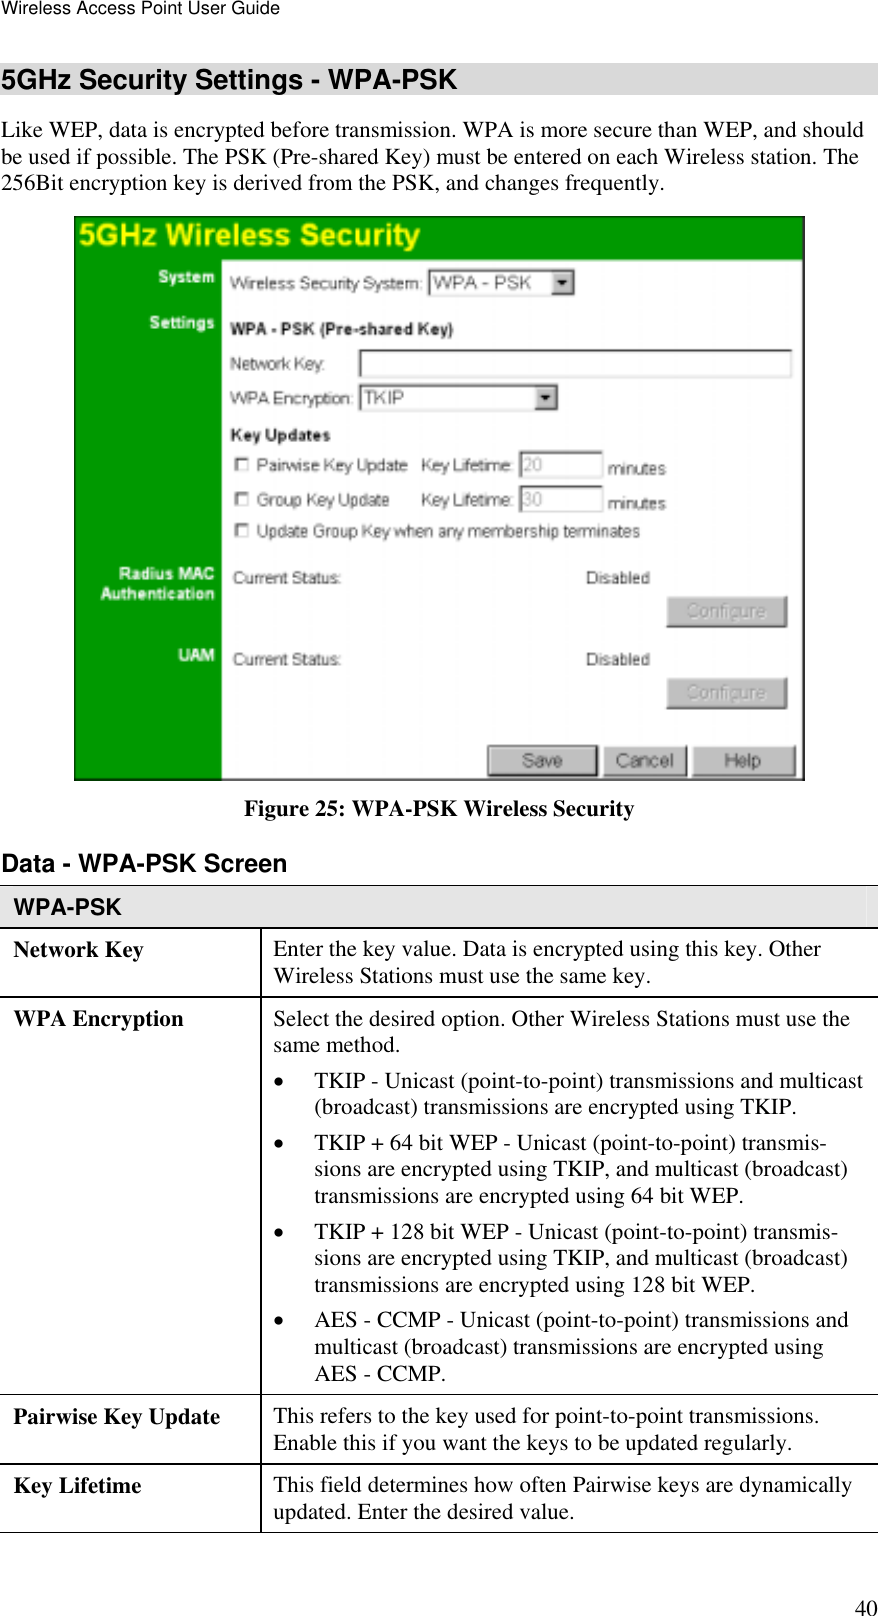 Wireless Access Point User Guide 40 5GHz Security Settings - WPA-PSK Like WEP, data is encrypted before transmission. WPA is more secure than WEP, and should be used if possible. The PSK (Pre-shared Key) must be entered on each Wireless station. The 256Bit encryption key is derived from the PSK, and changes frequently.  Figure 25: WPA-PSK Wireless Security Data - WPA-PSK Screen  WPA-PSK Network Key  Enter the key value. Data is encrypted using this key. Other Wireless Stations must use the same key. WPA Encryption  Select the desired option. Other Wireless Stations must use the same method.  •  TKIP - Unicast (point-to-point) transmissions and multicast (broadcast) transmissions are encrypted using TKIP.  •  TKIP + 64 bit WEP - Unicast (point-to-point) transmis-sions are encrypted using TKIP, and multicast (broadcast) transmissions are encrypted using 64 bit WEP.  •  TKIP + 128 bit WEP - Unicast (point-to-point) transmis-sions are encrypted using TKIP, and multicast (broadcast) transmissions are encrypted using 128 bit WEP.  •  AES - CCMP - Unicast (point-to-point) transmissions and multicast (broadcast) transmissions are encrypted using AES - CCMP.  Pairwise Key Update  This refers to the key used for point-to-point transmissions. Enable this if you want the keys to be updated regularly. Key Lifetime  This field determines how often Pairwise keys are dynamically updated. Enter the desired value. 